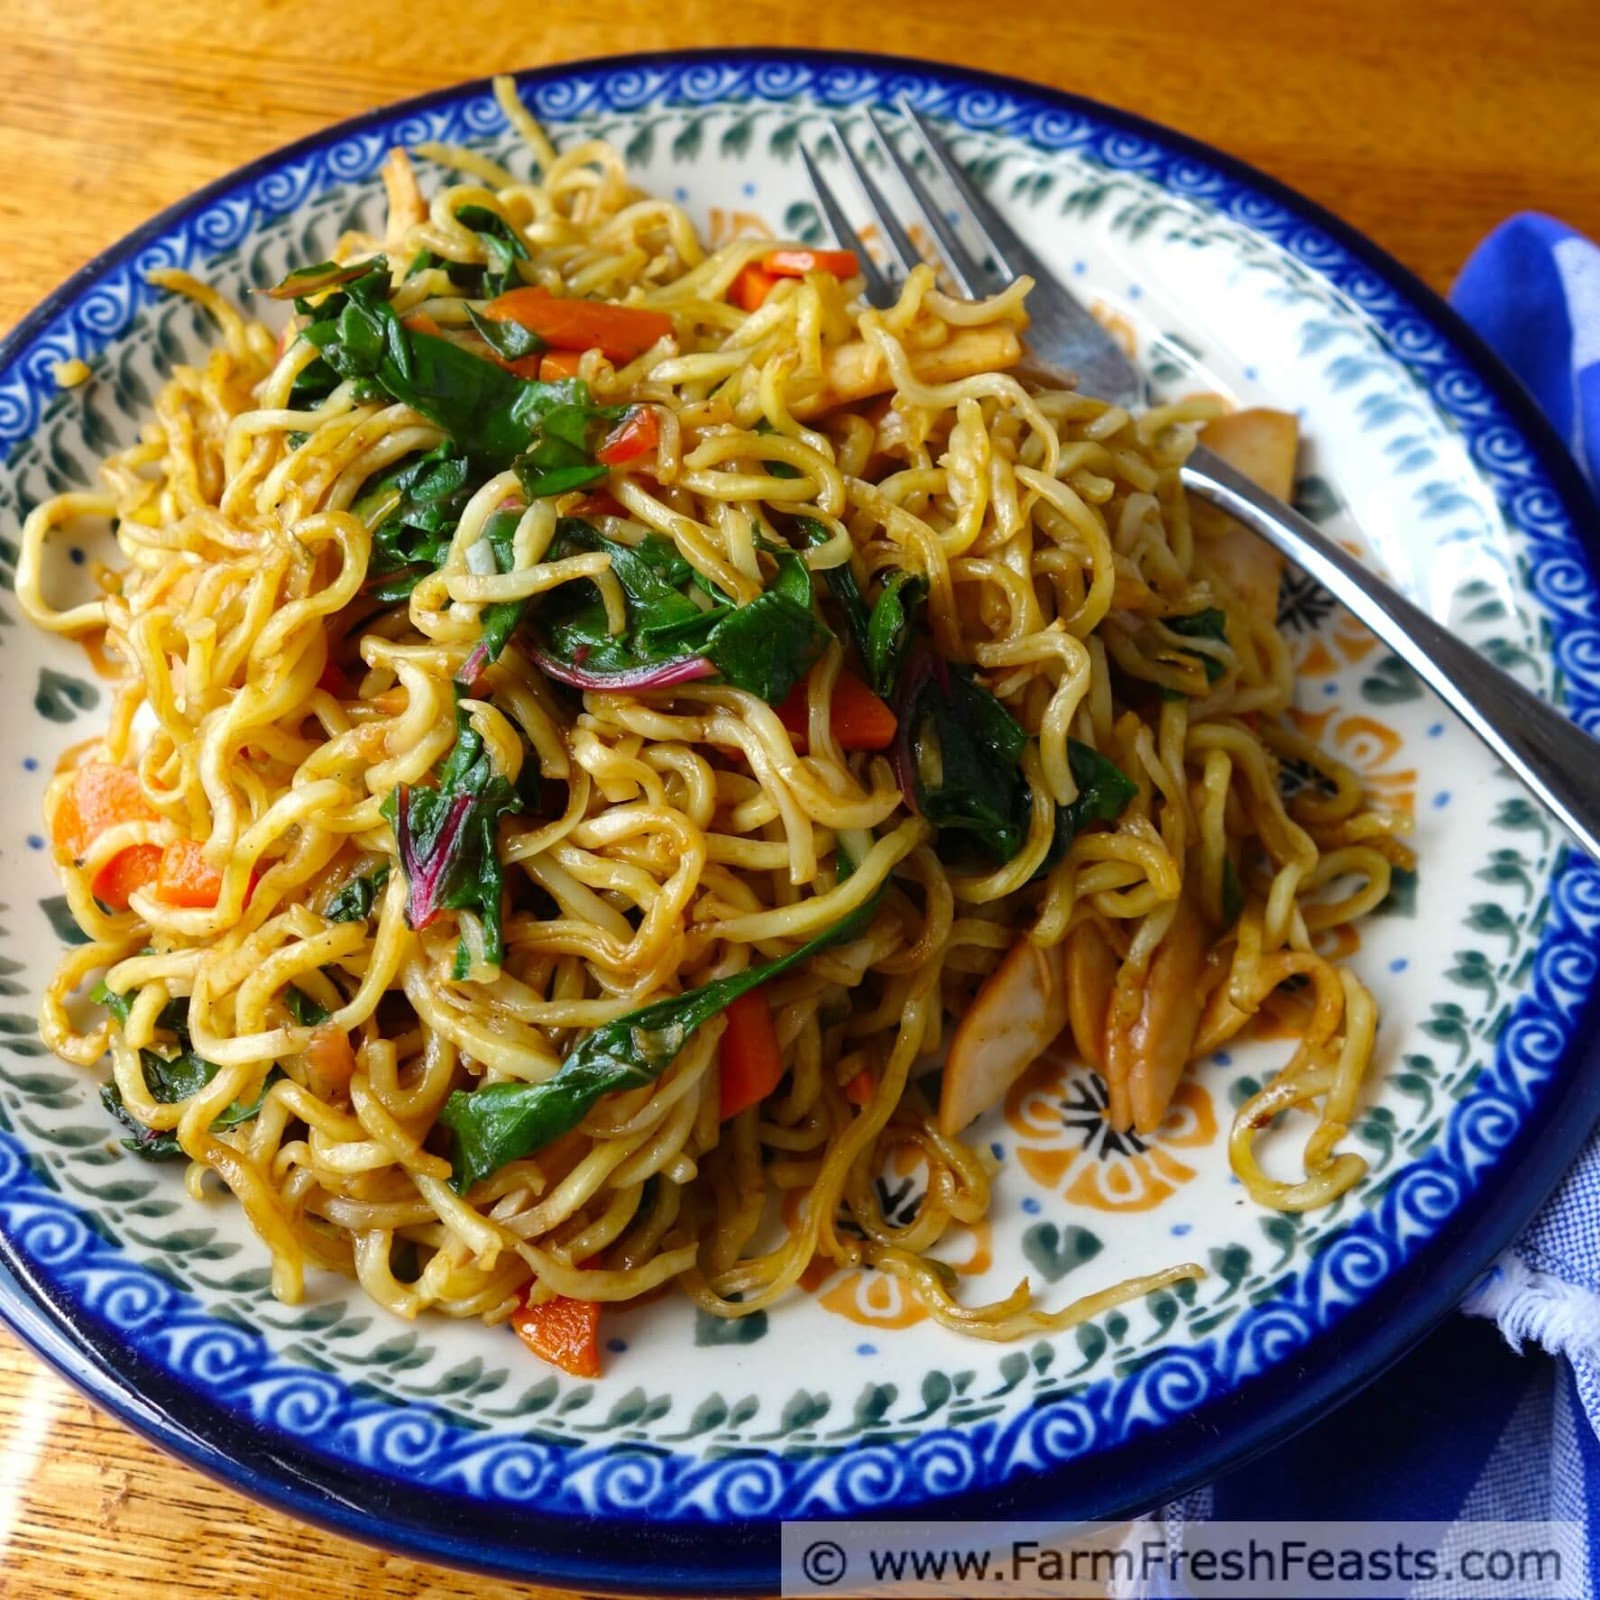 Where to find Yakisoba Noodles in Grocery Store?